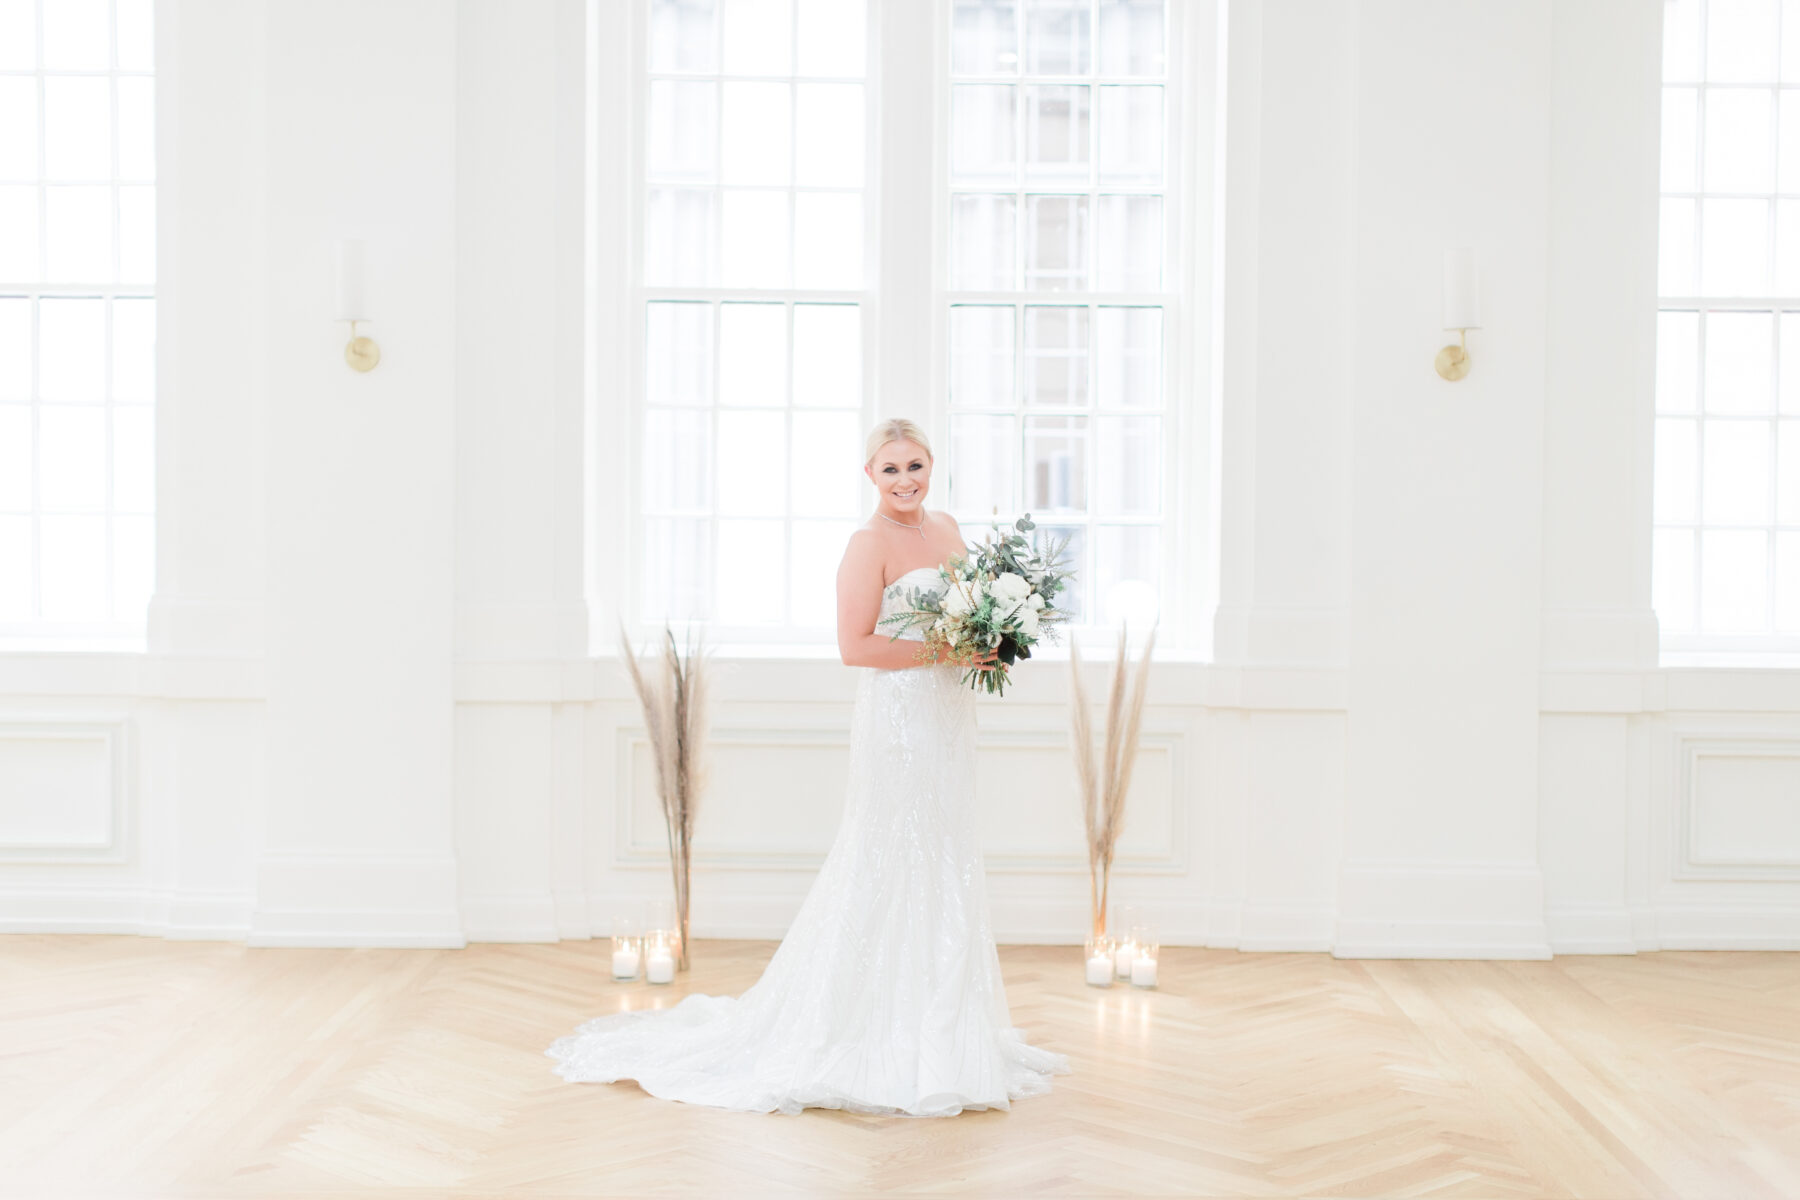 Classic, Yet Modern New Years Eve Wedding Inspiration featured on Nashville Bride Guide